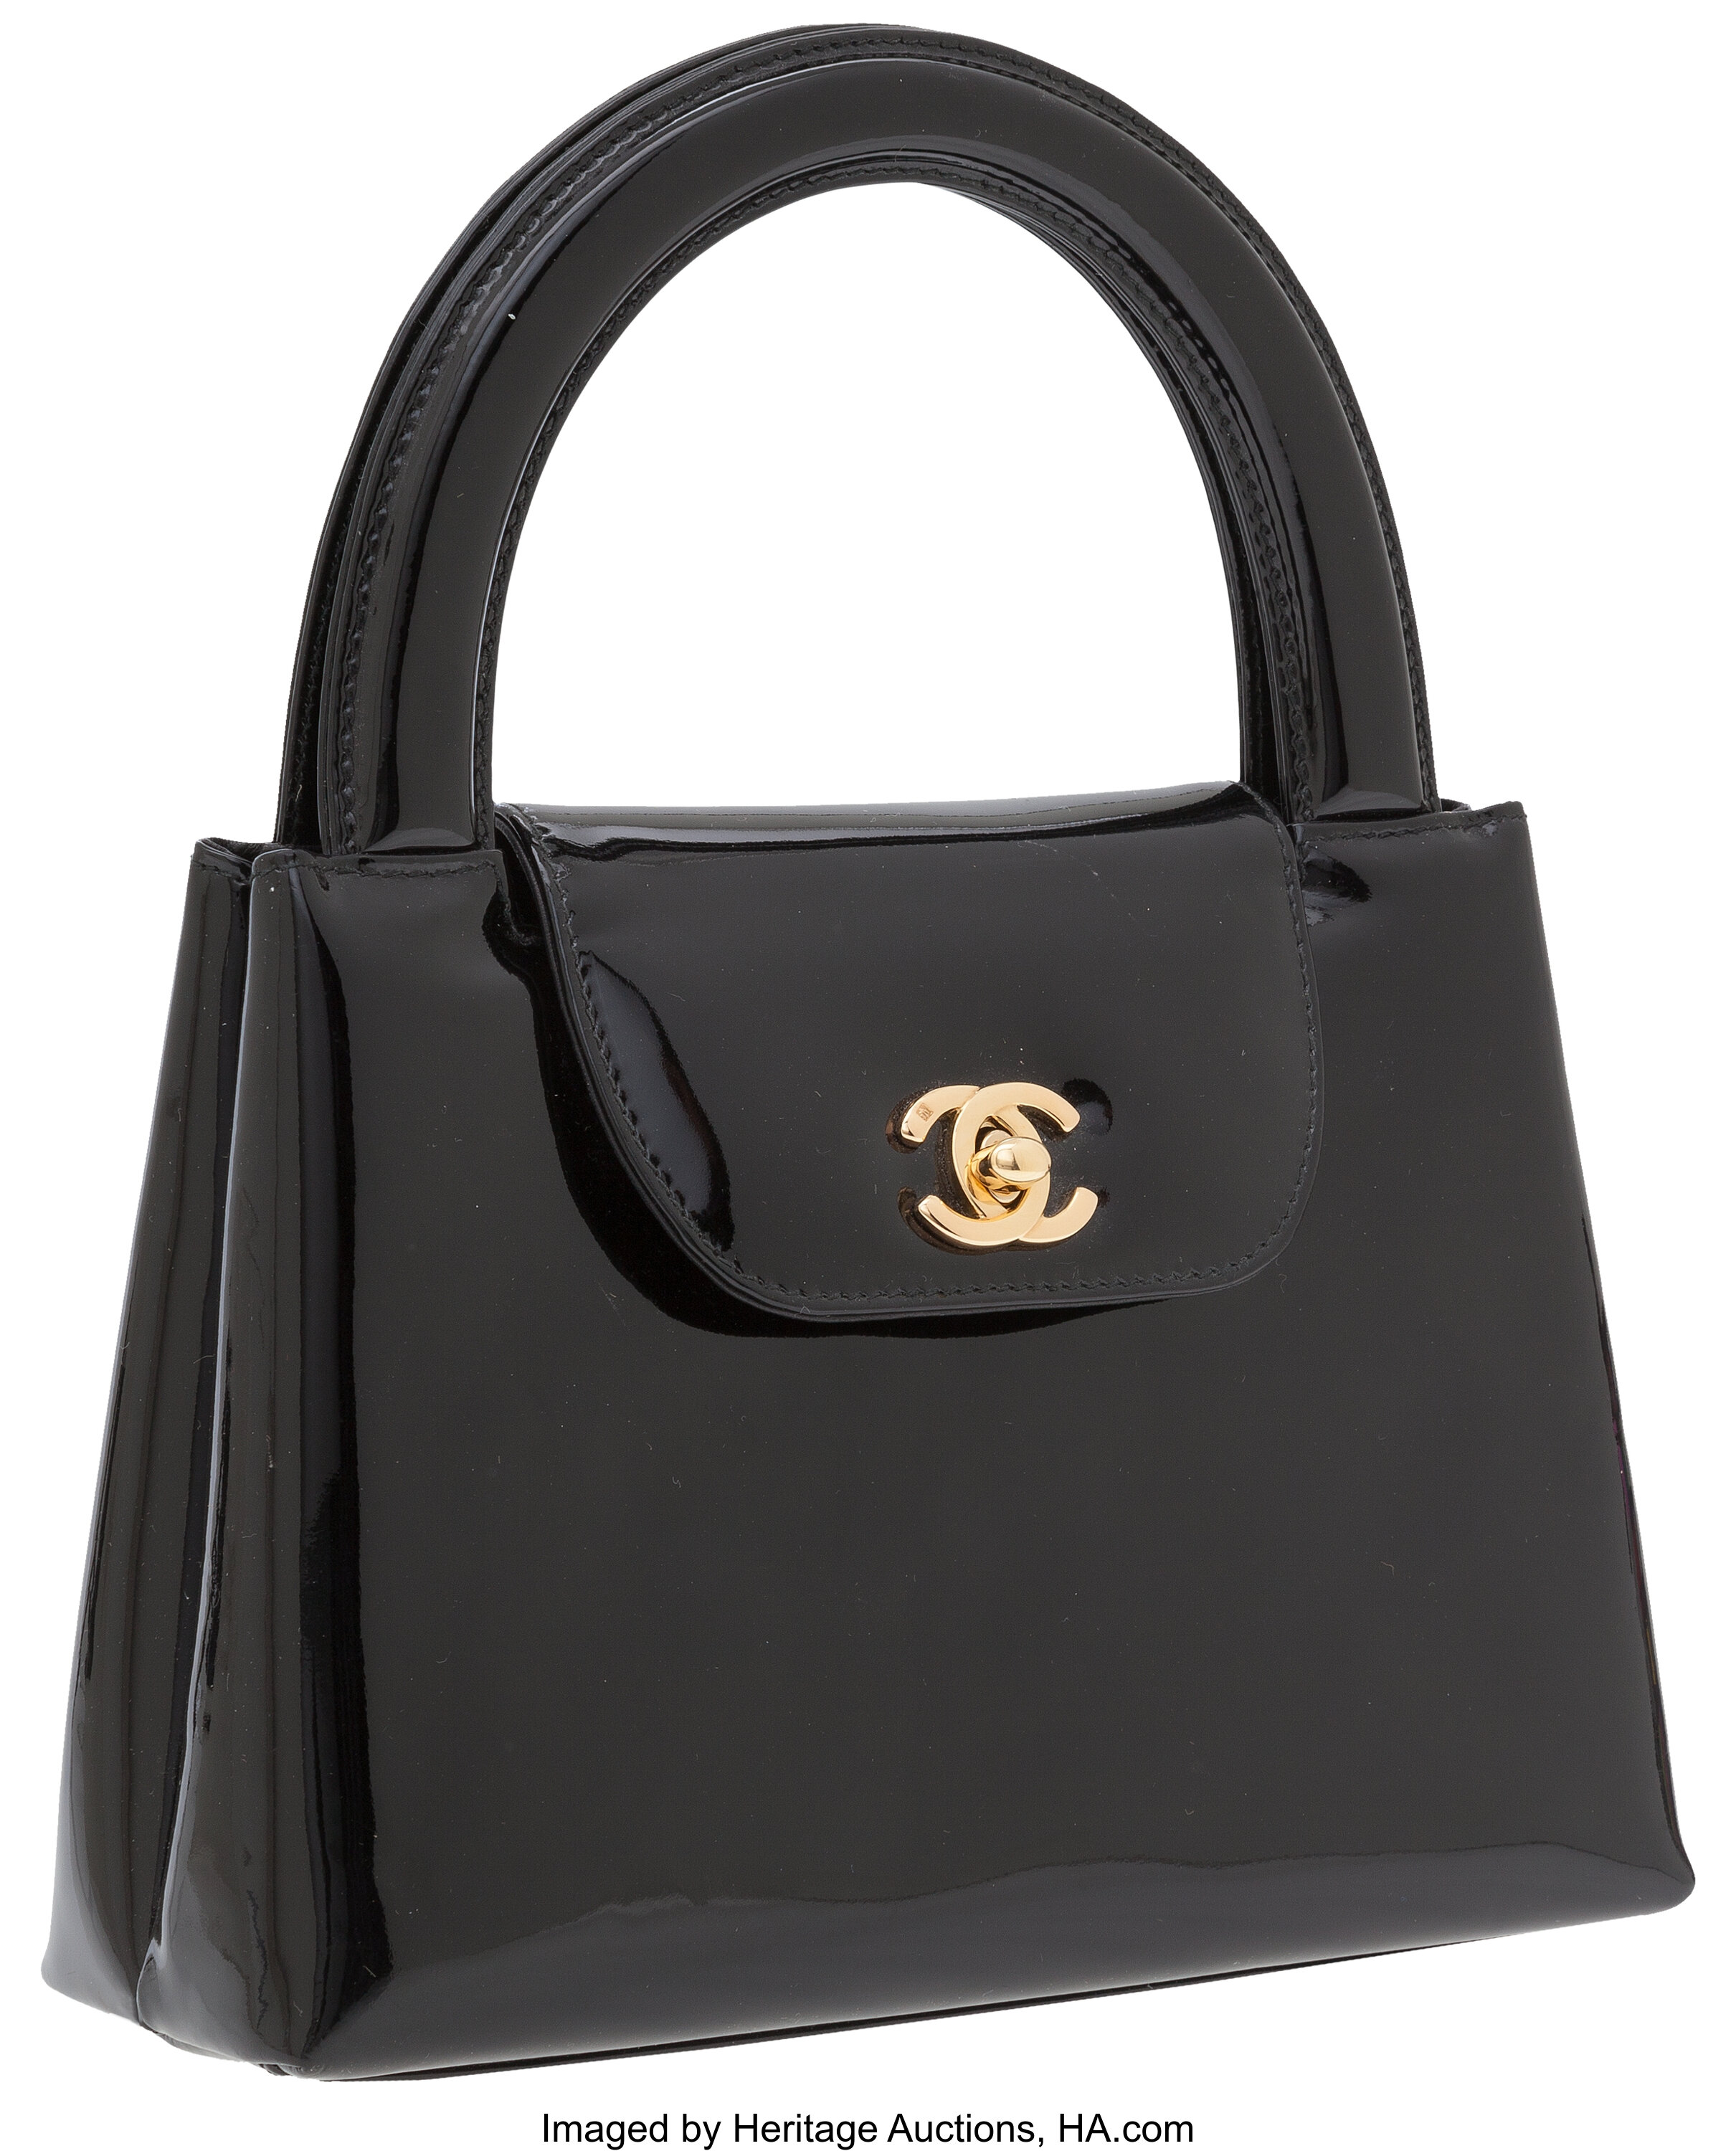 Chanel Black Patent Leather Small Top Handle Bag.  Luxury